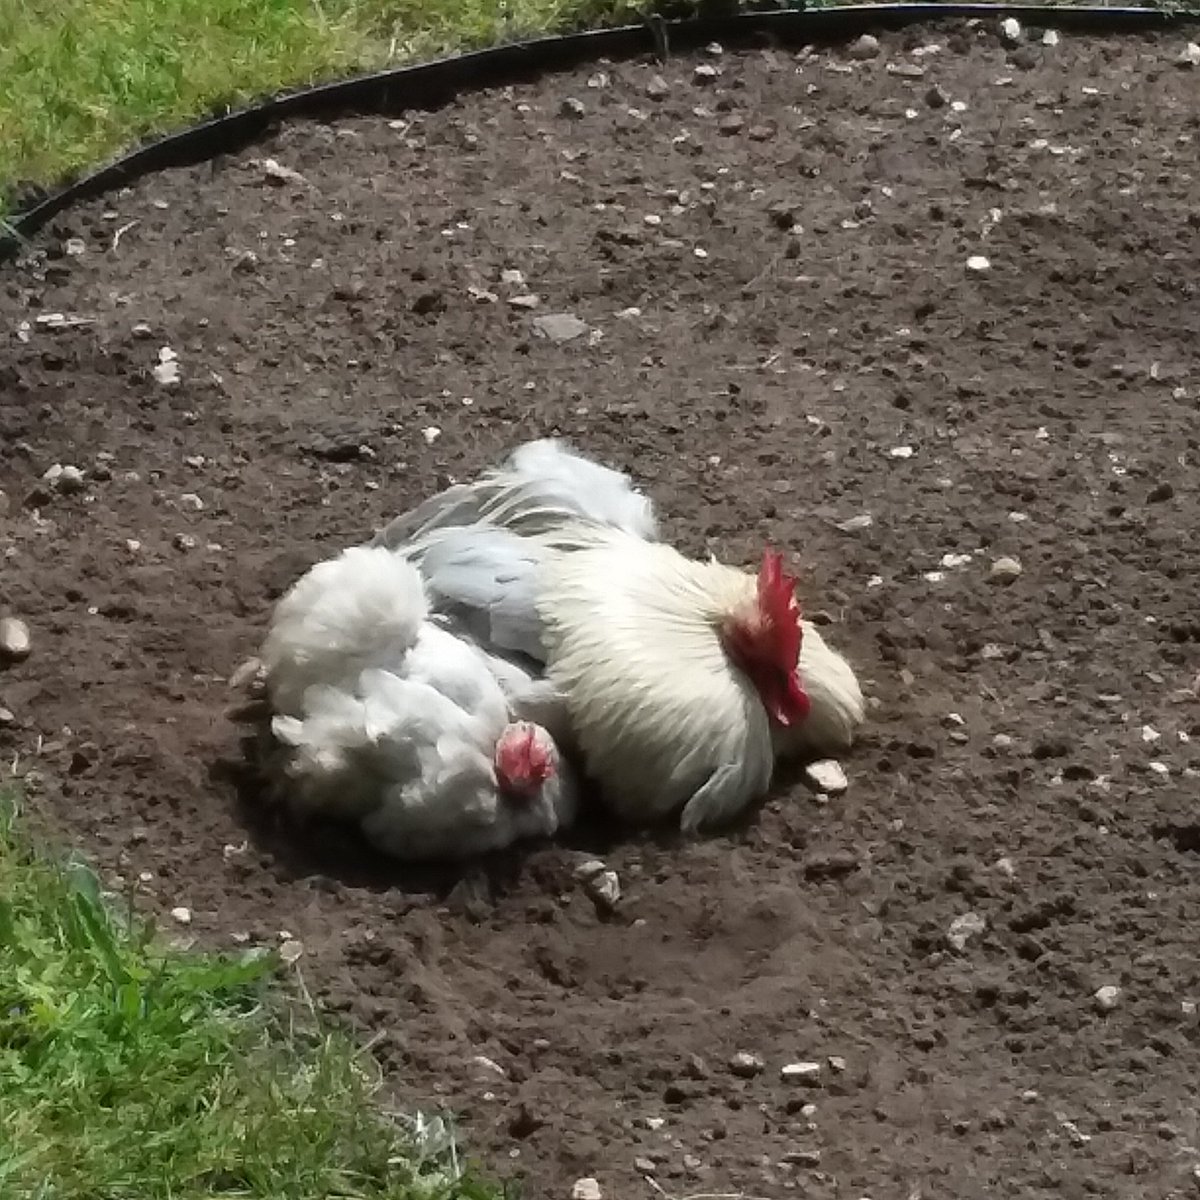 My new iris bed and uninvited guests! #gardenchickens @georgenorman20